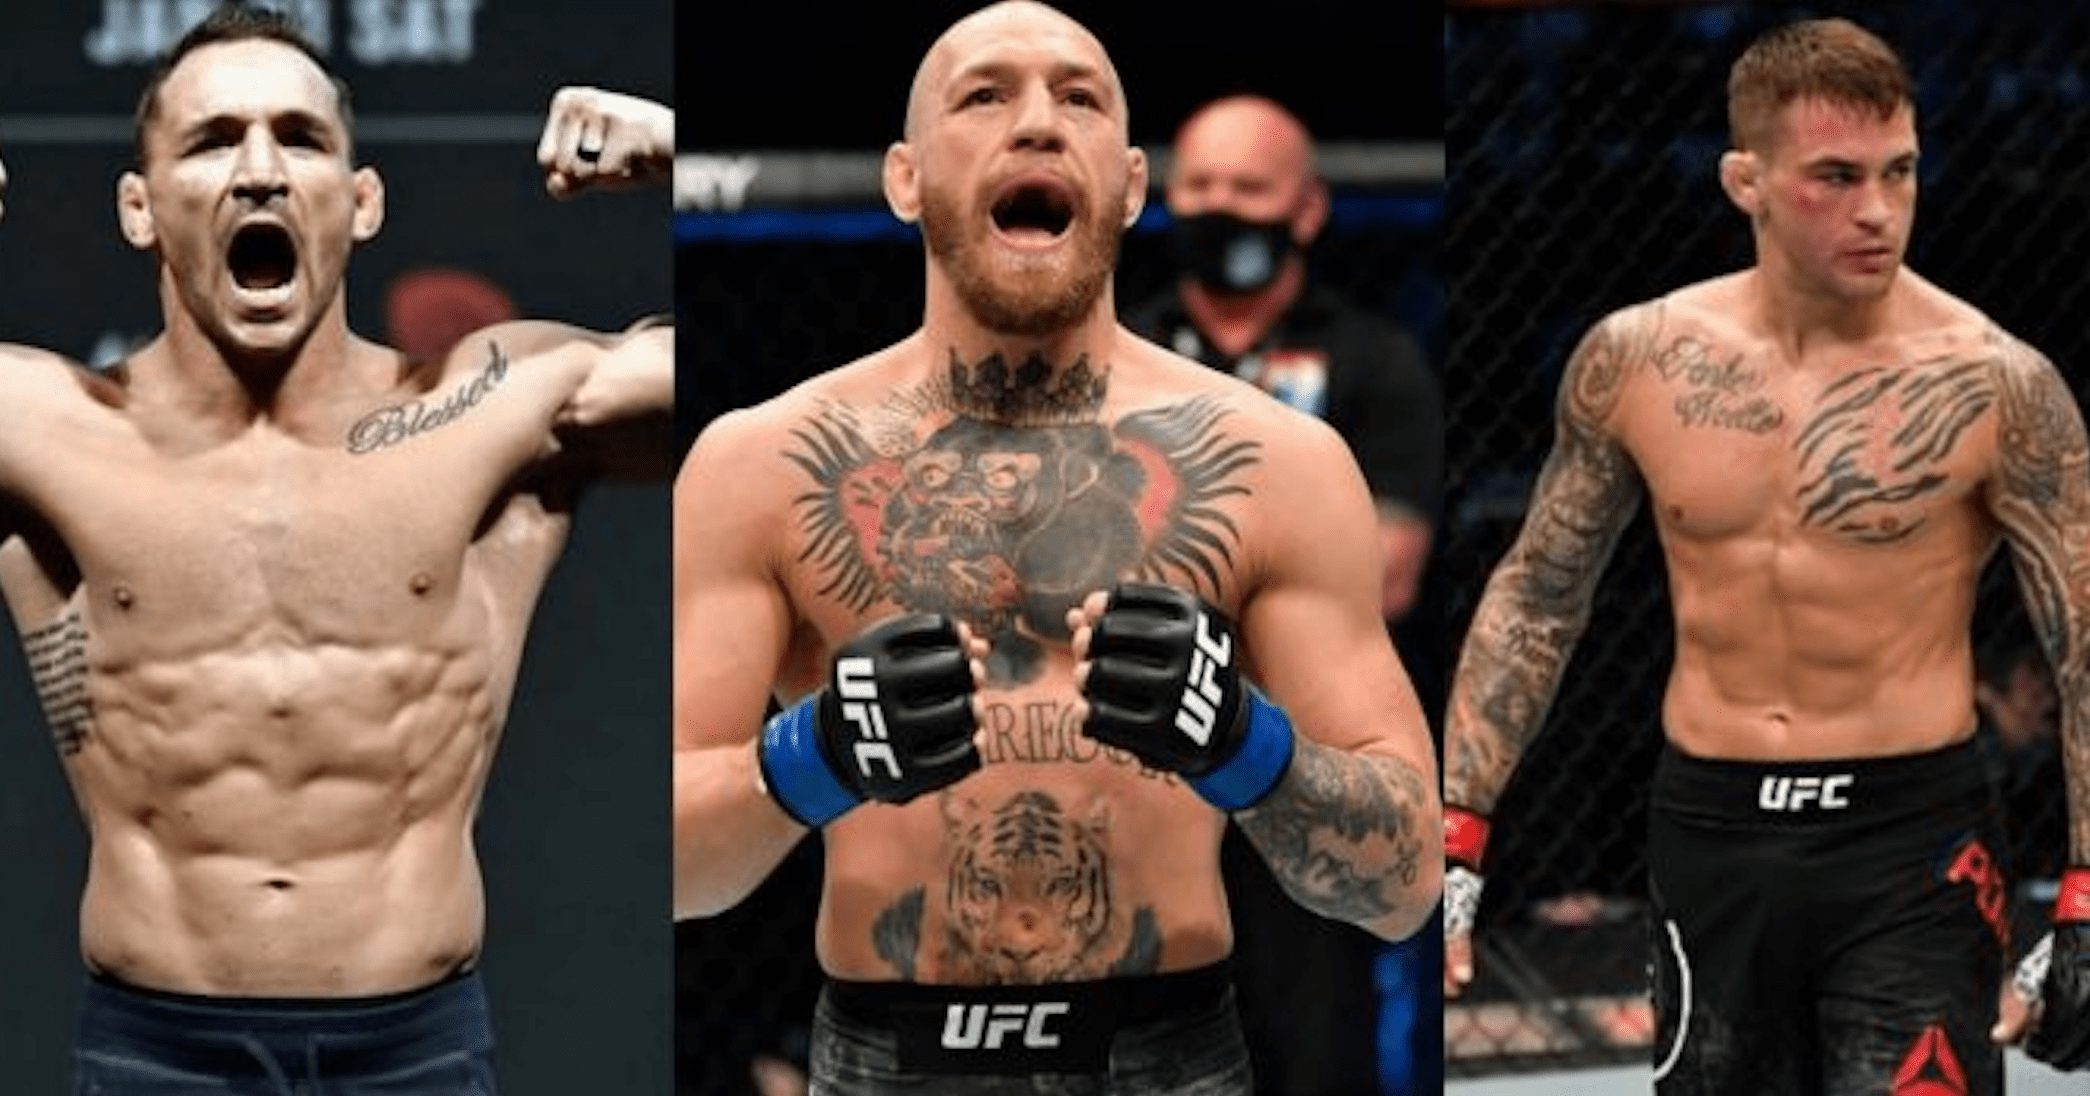 Poirier Or McGregor, Chandler Reveals Who He’s Rooting For At UFC 264